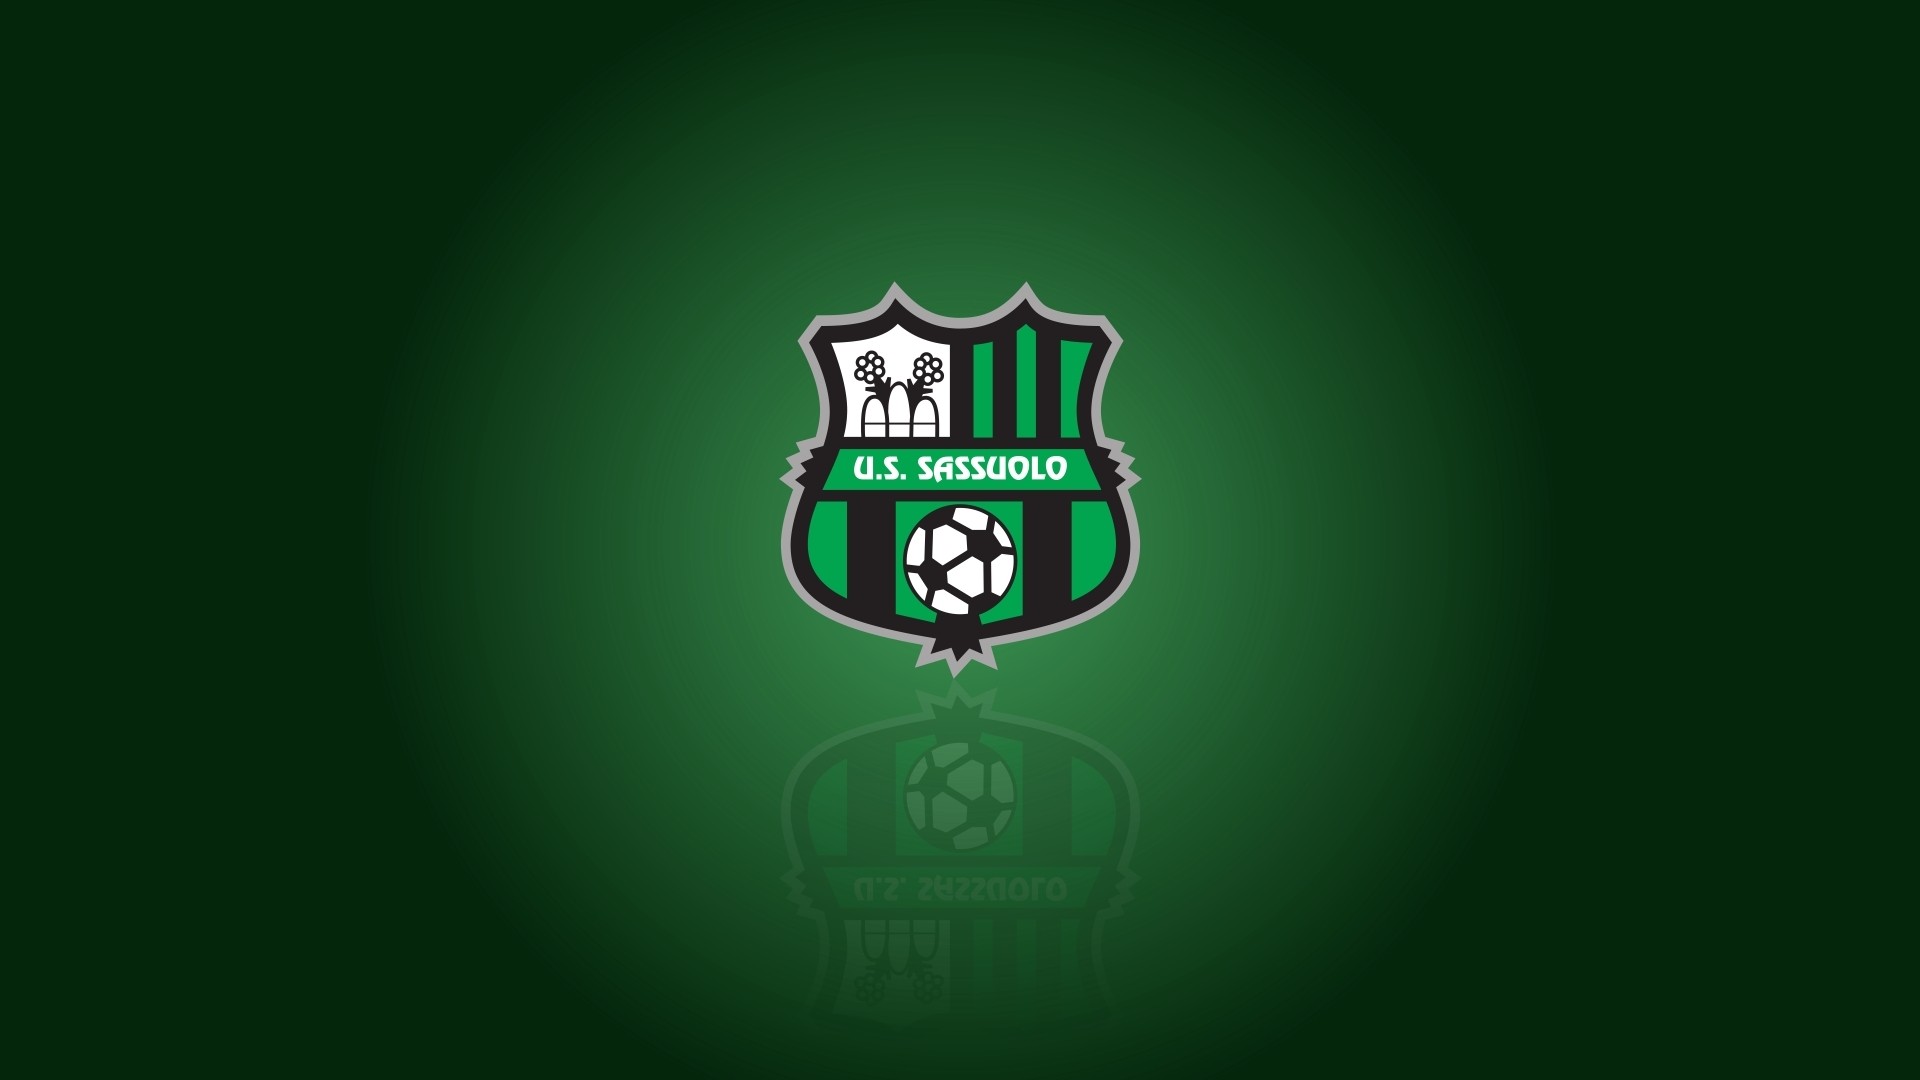 US Sassuolo Wallpaper HD With high-resolution 1920X1080 pixel. You can use this wallpaper for your Desktop Computers, Mac Screensavers, Windows Backgrounds, iPhone Wallpapers, Tablet or Android Lock screen and another Mobile device